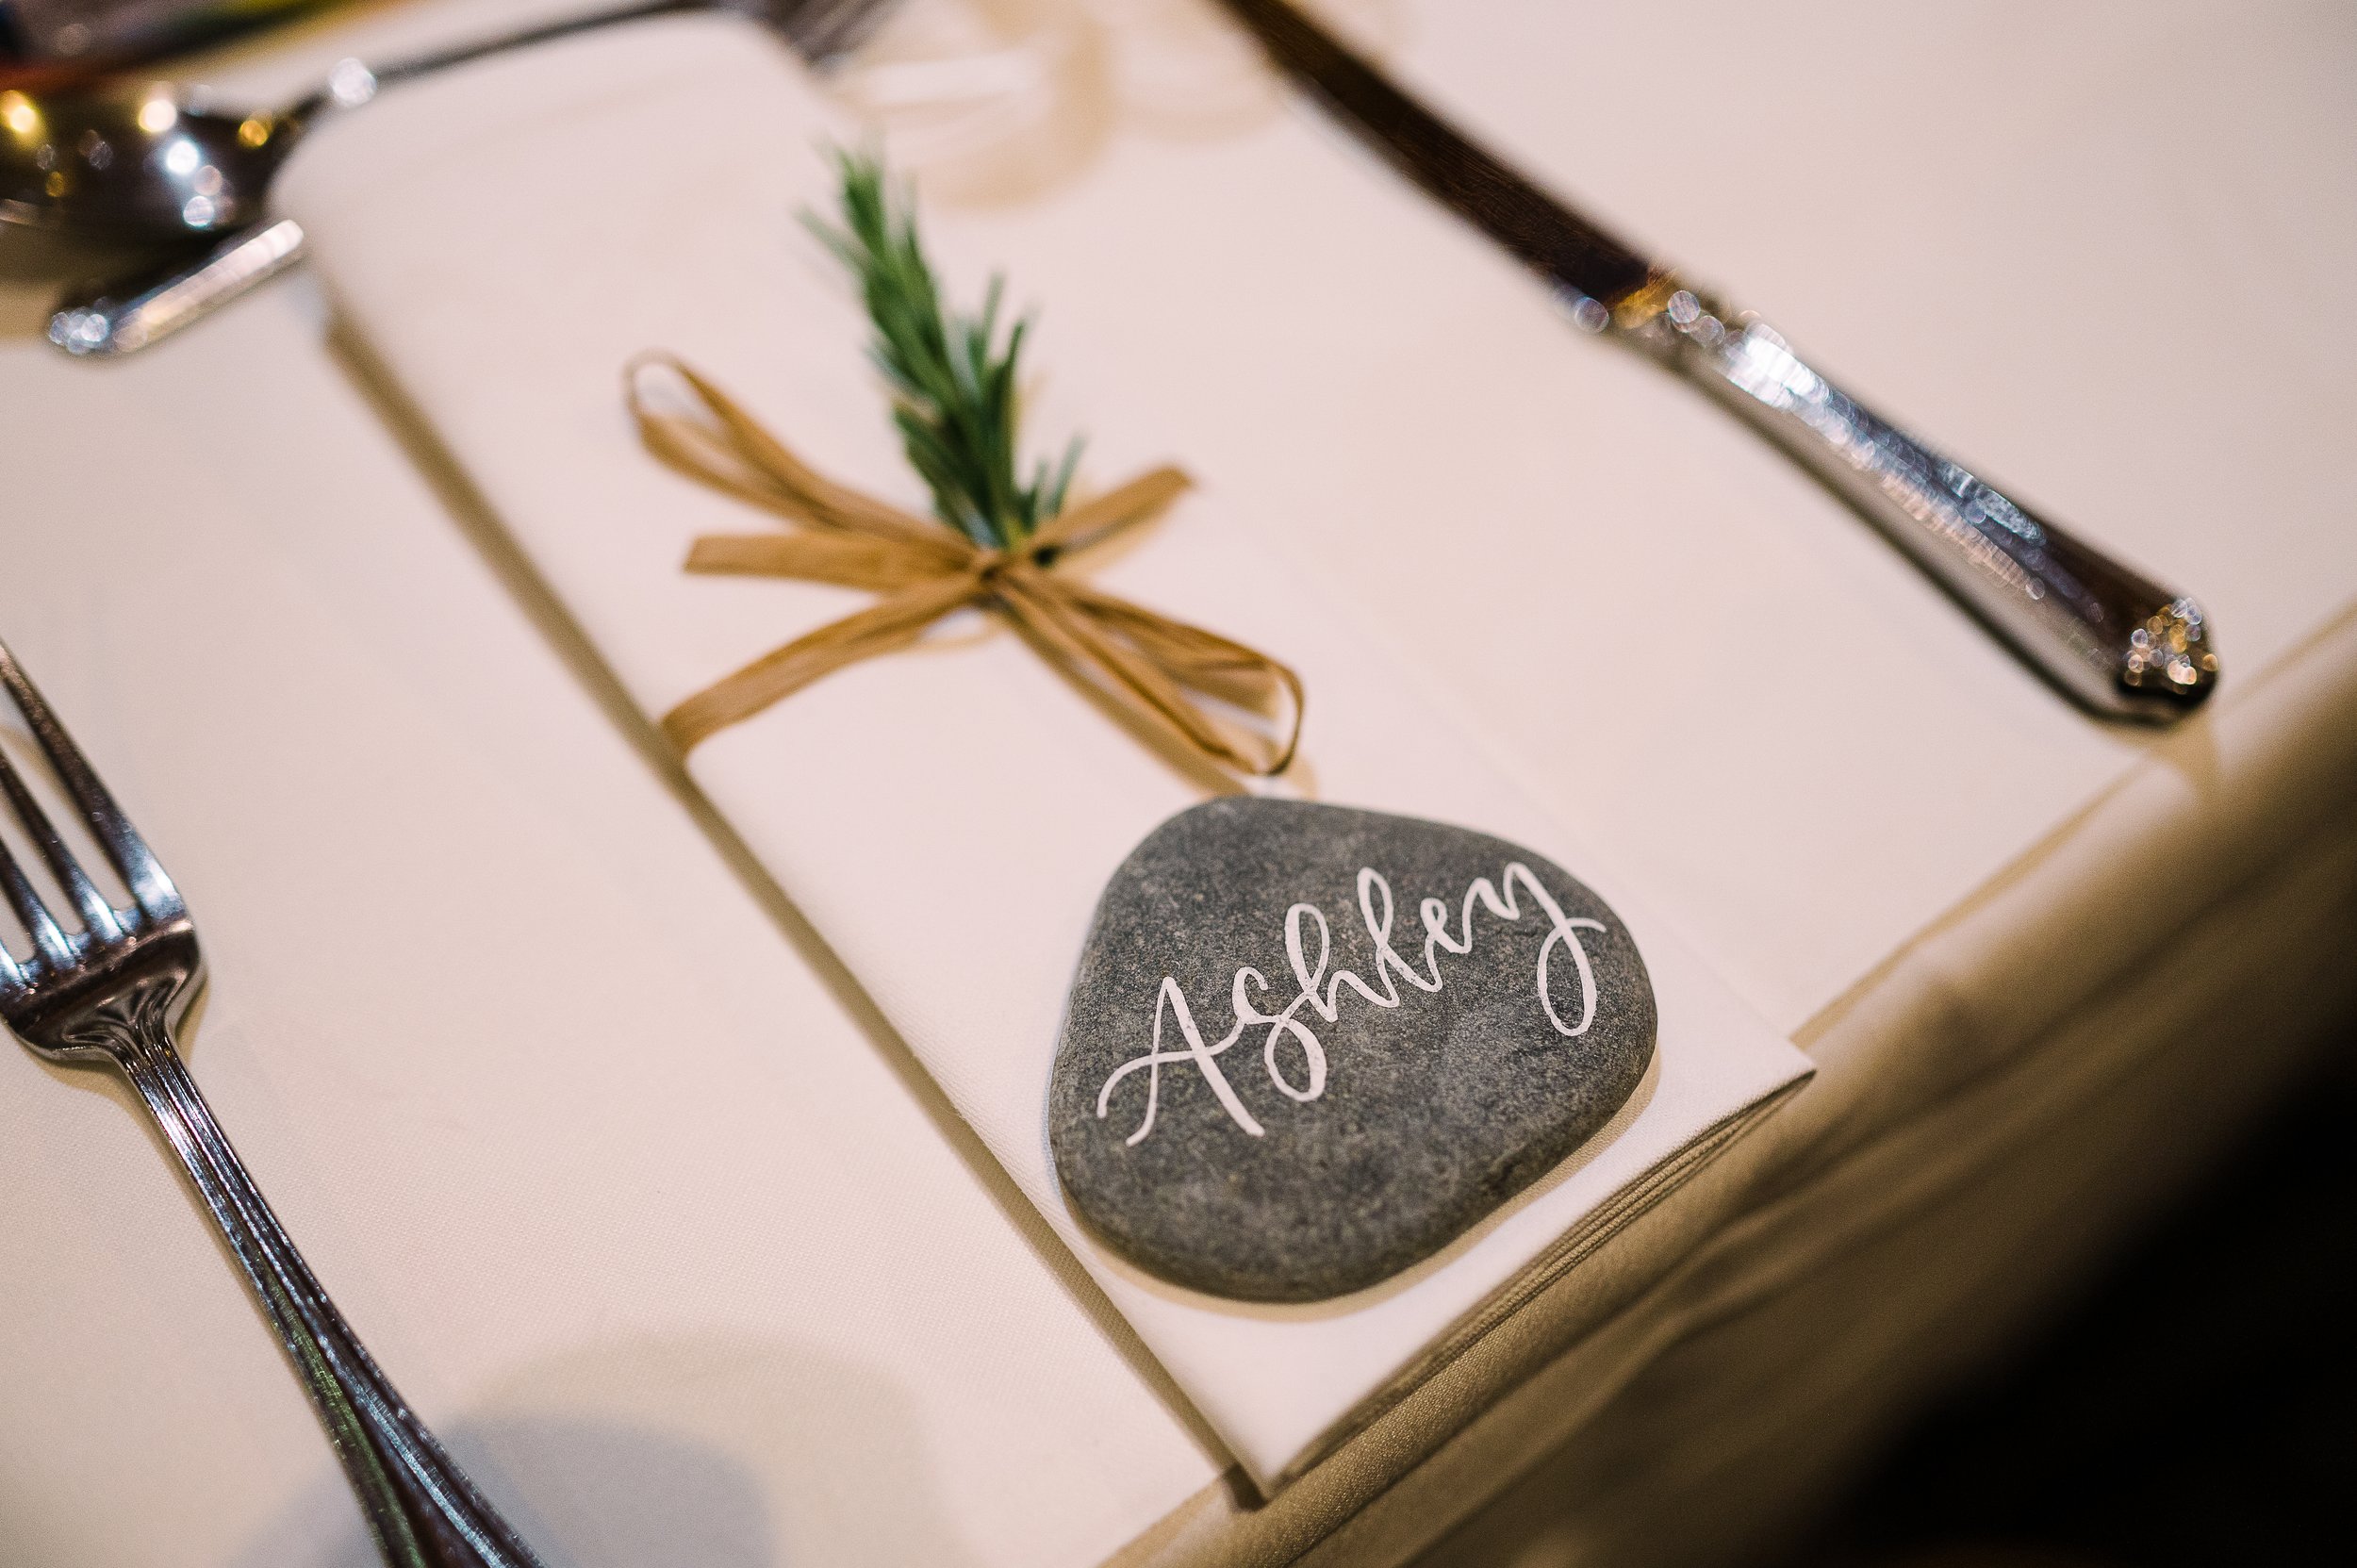 Pebble place card - calligraphy placecards - painted pebbles for beach themed wedding - Brighton wedding stationery by The Amyverse.jpg